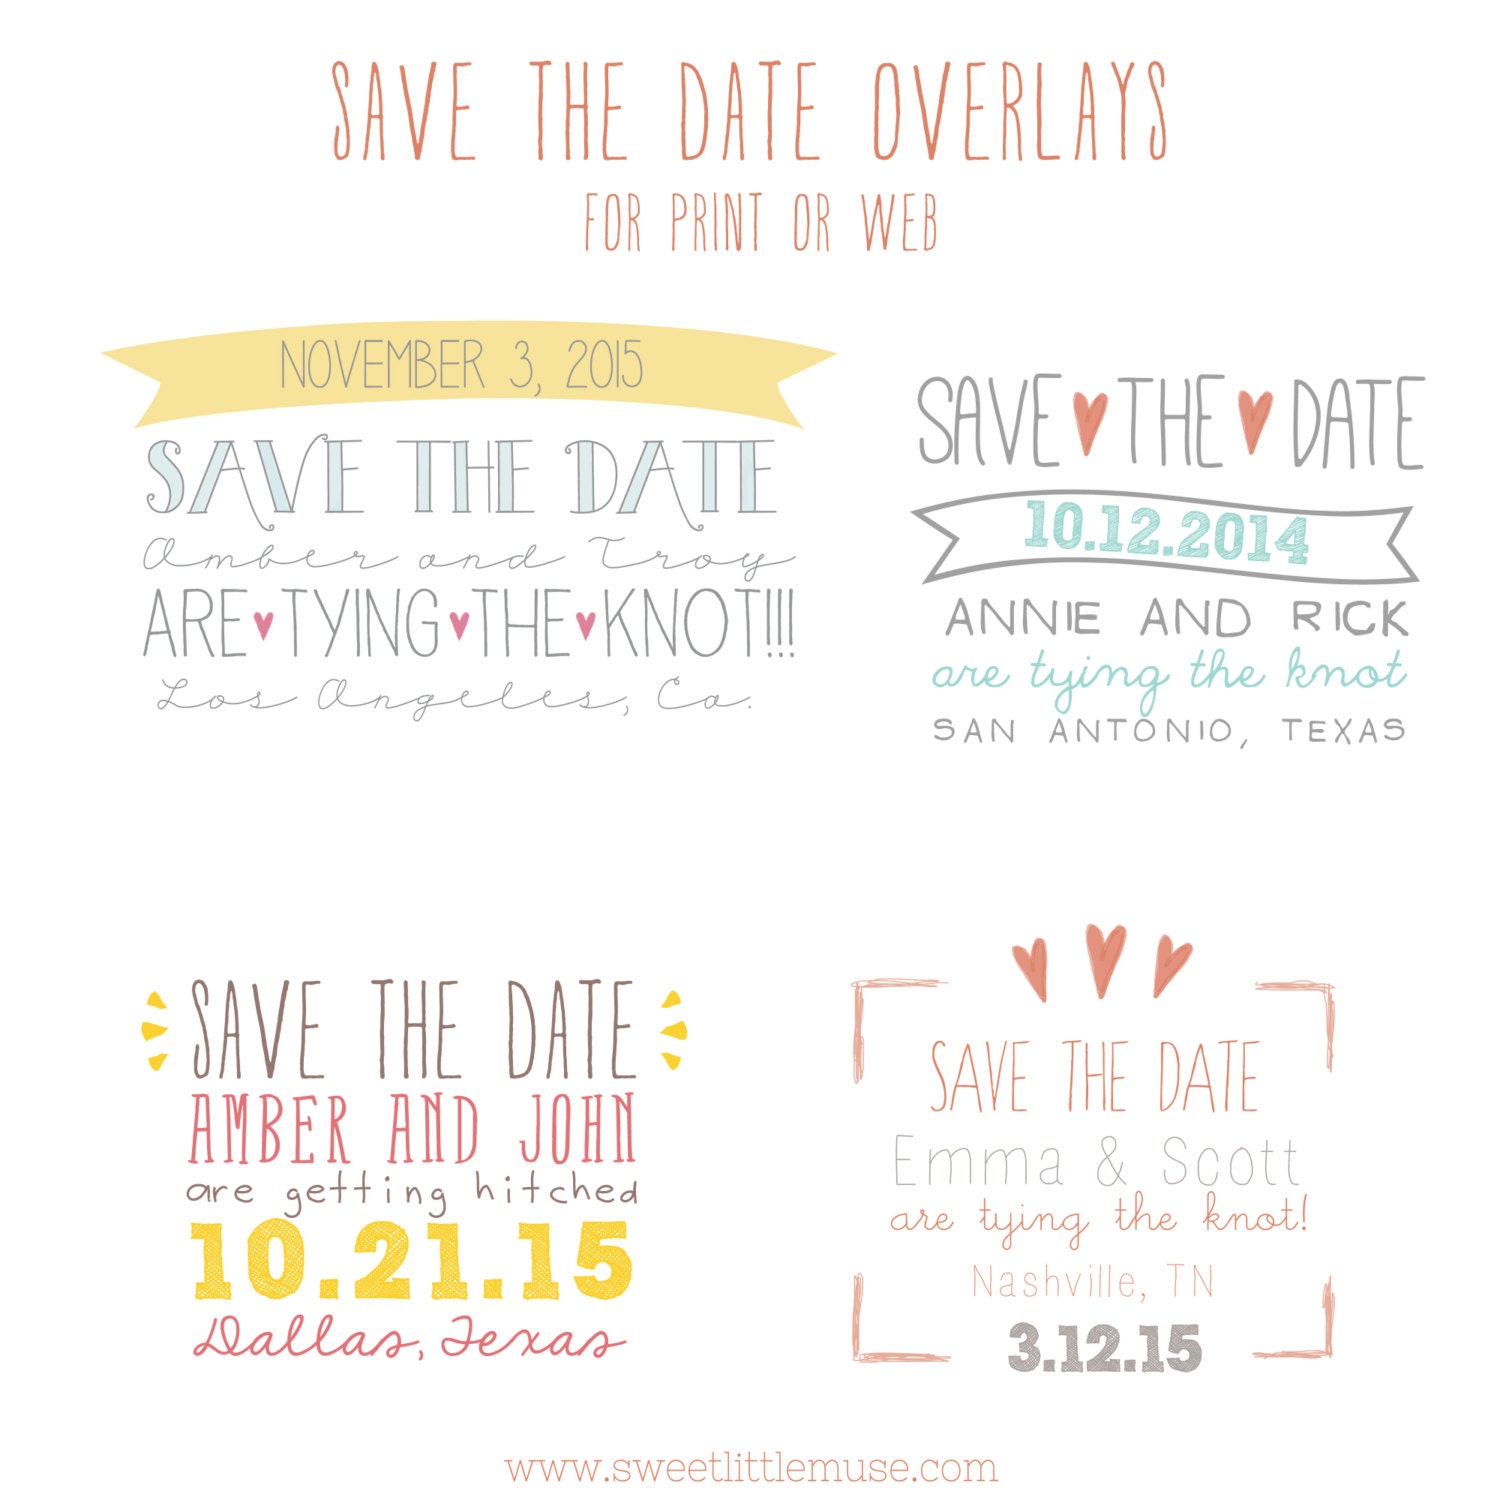 Download Save the date overlays save the date template overlays psd